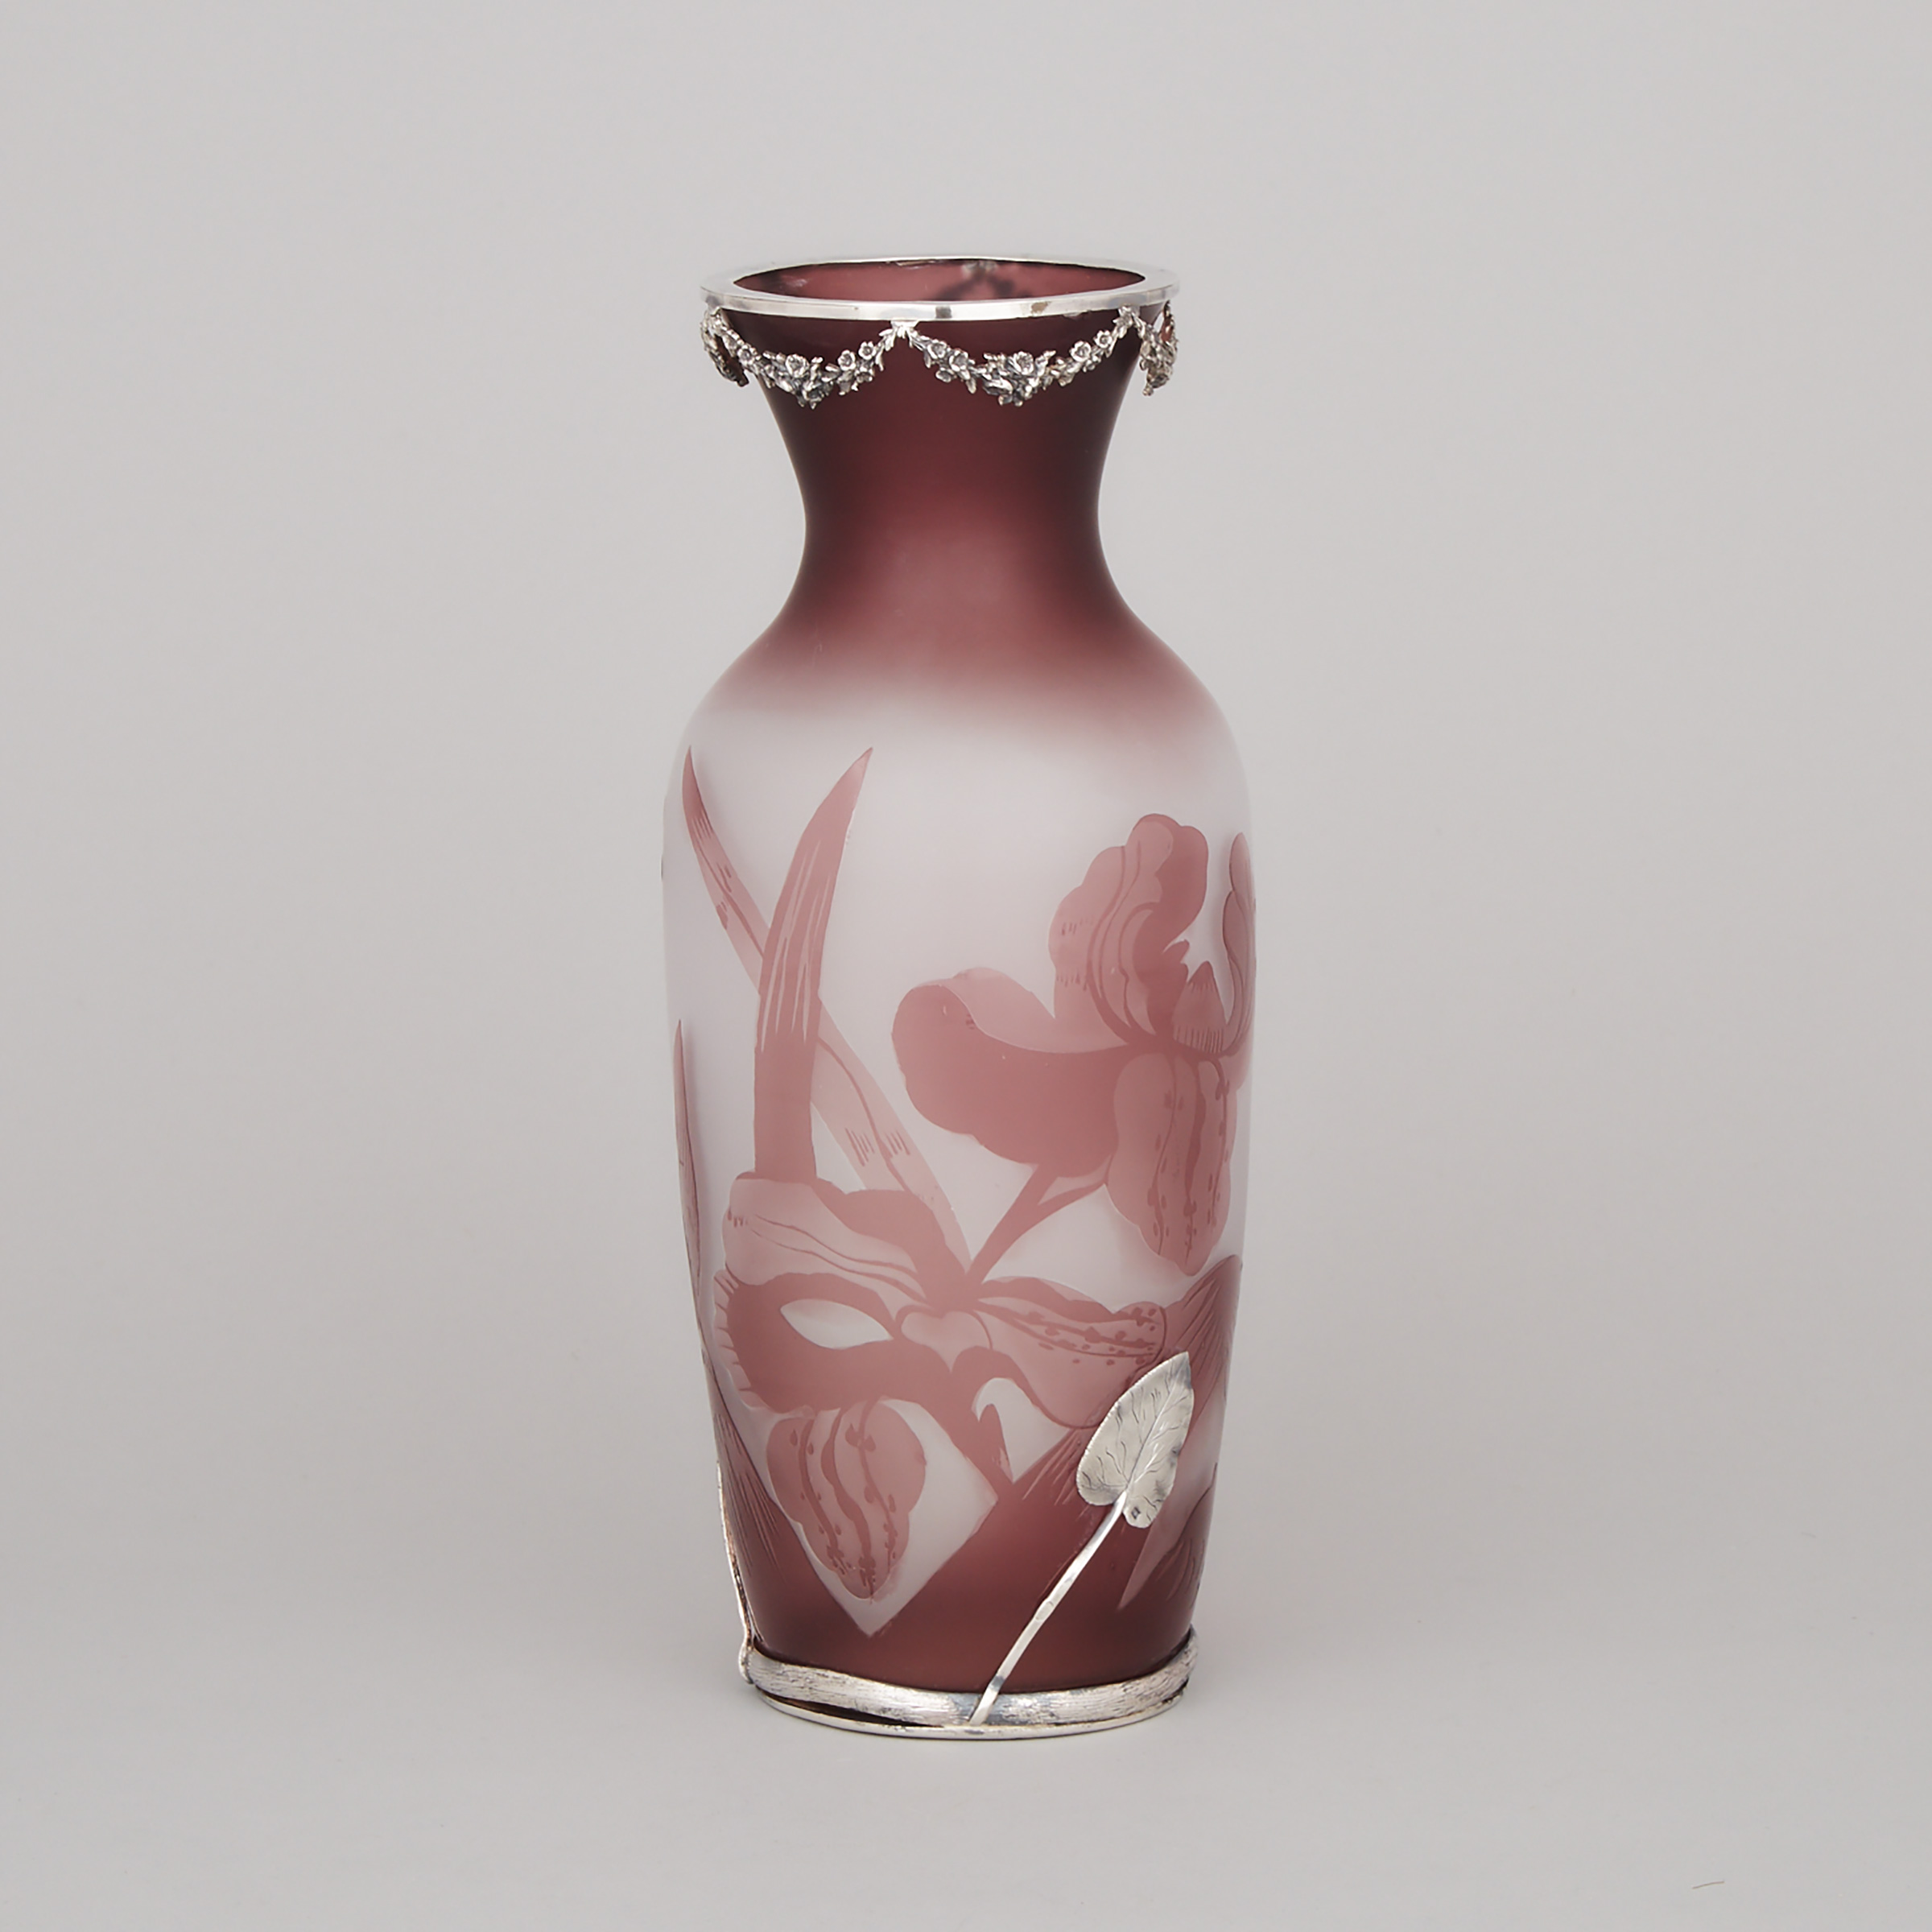 Russian Silver Mounted Cameo Glass Vase, late 19th/20th century